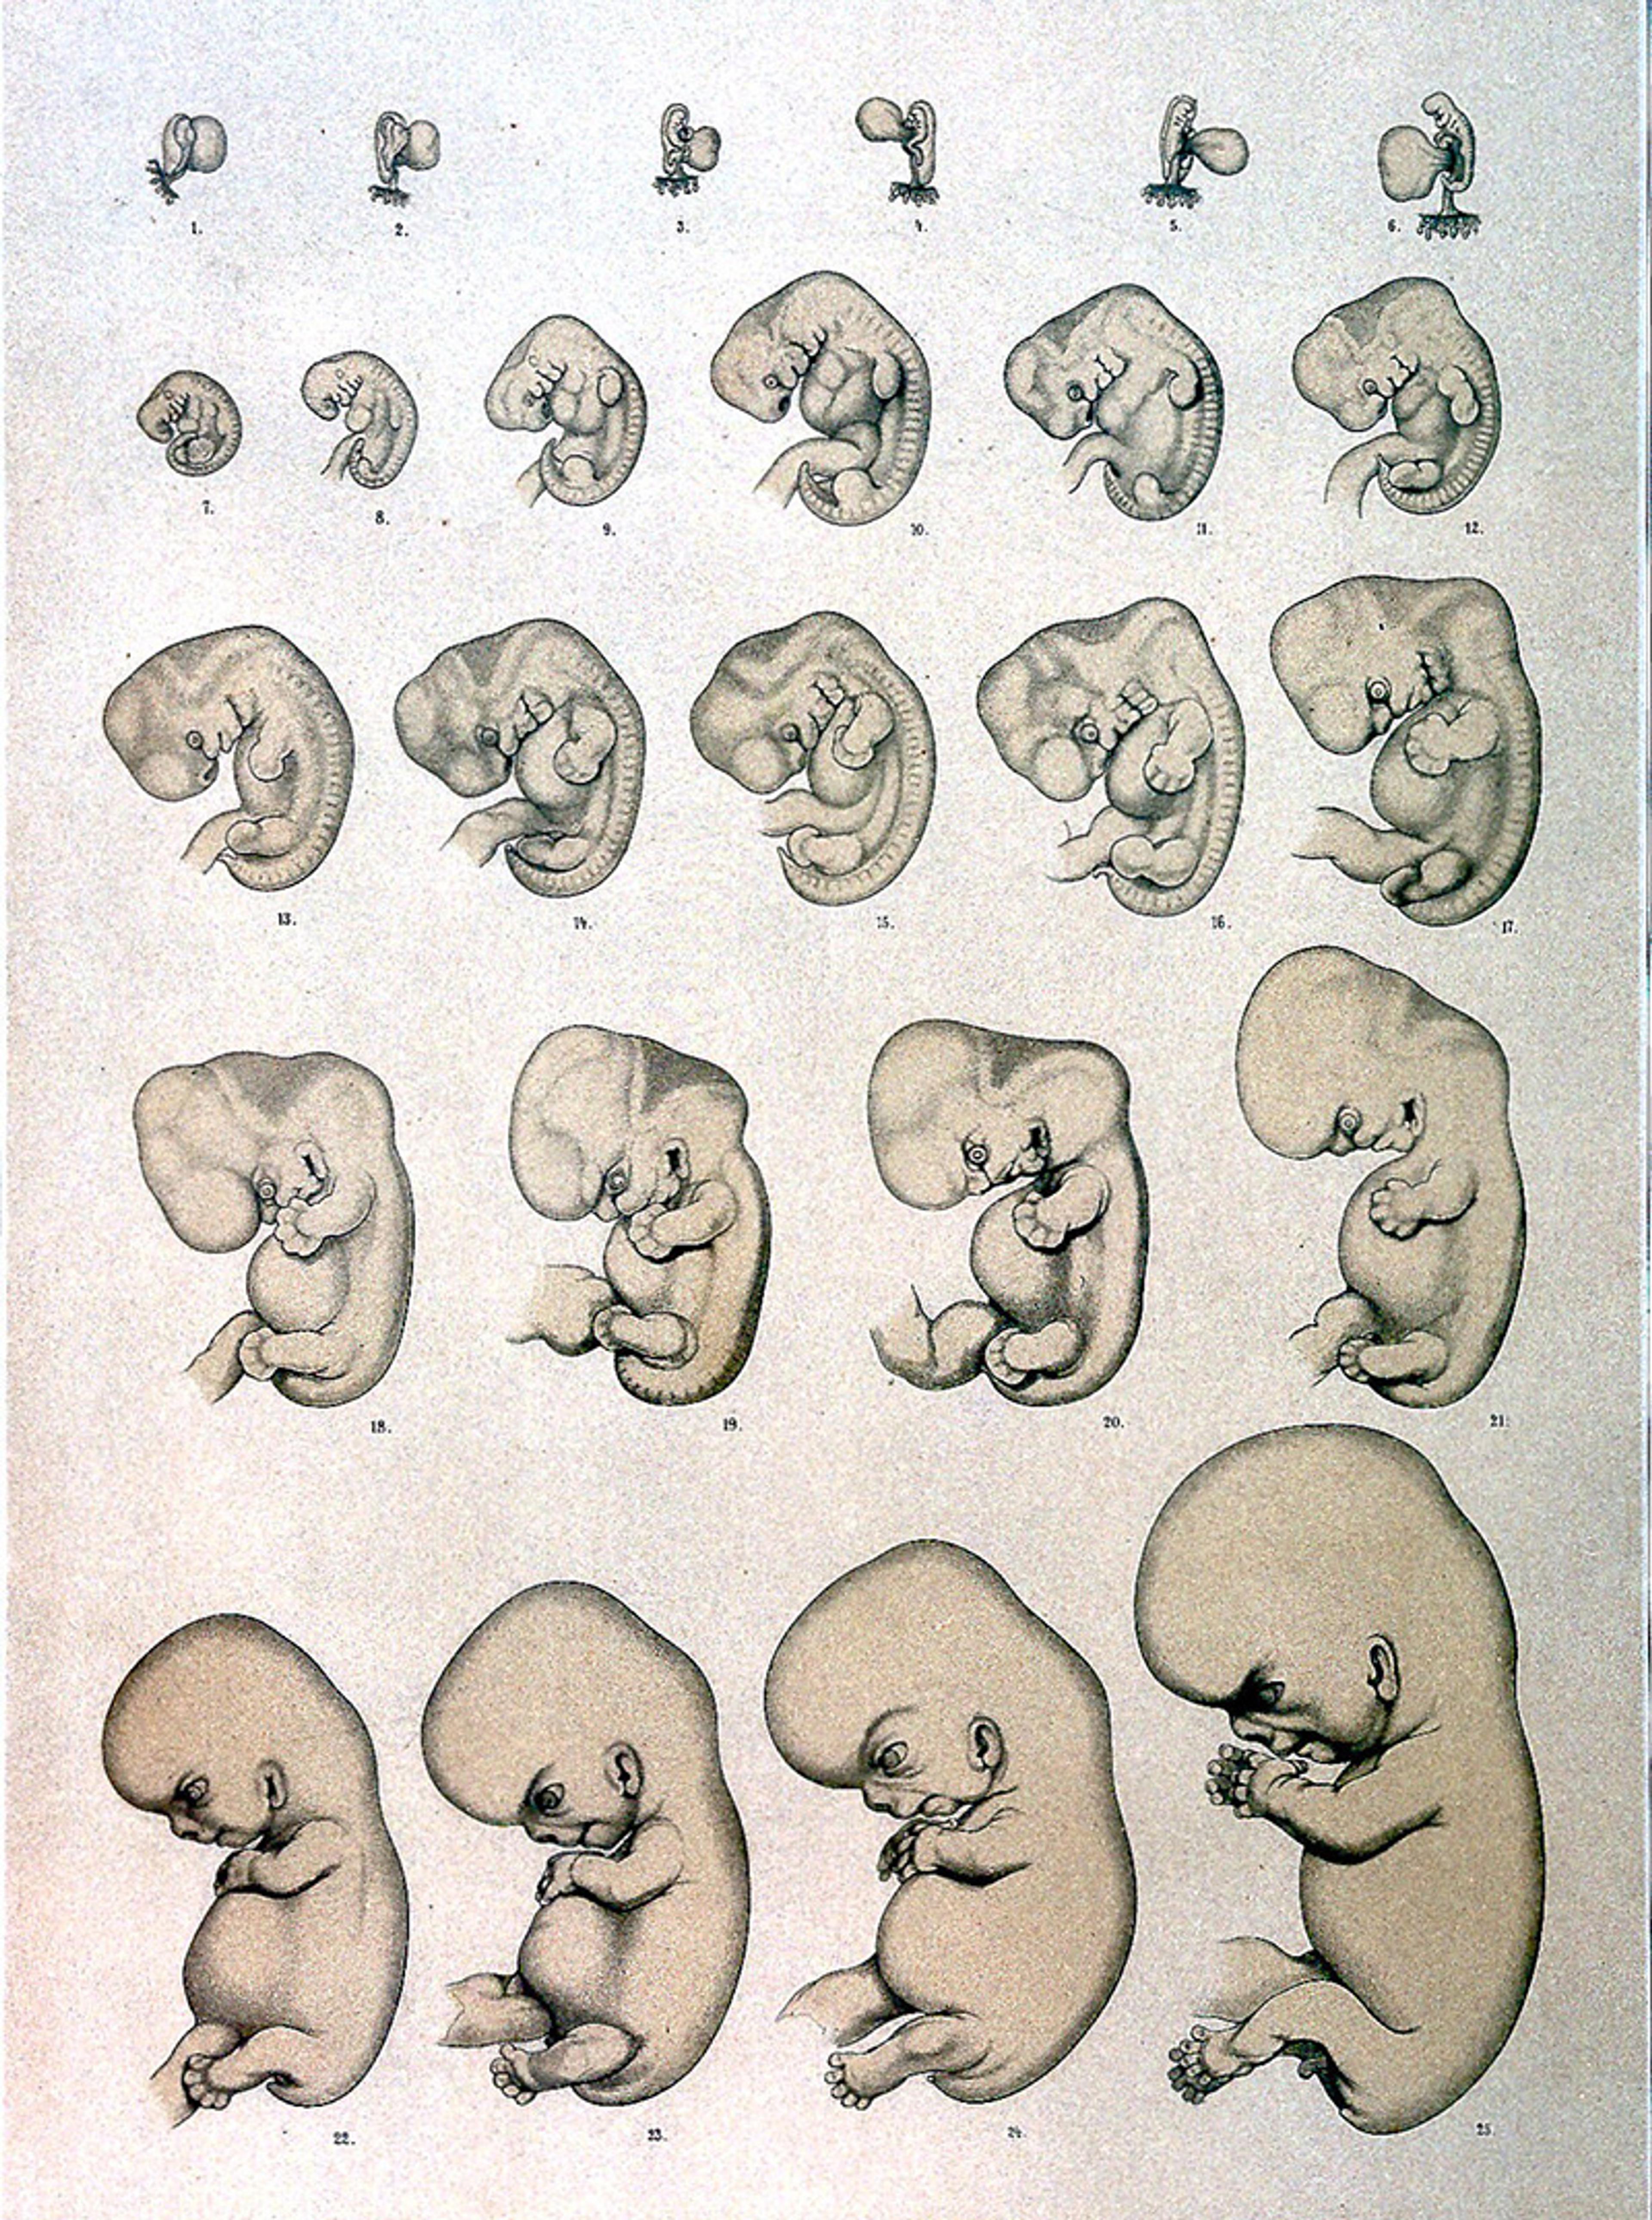 Illustration depicting 24 stages of human embryonic development, with each row showing progressively larger and more developed embryos, from early stages to more recognisable foetal forms. The images highlight the gradual changes and growth during early human development.